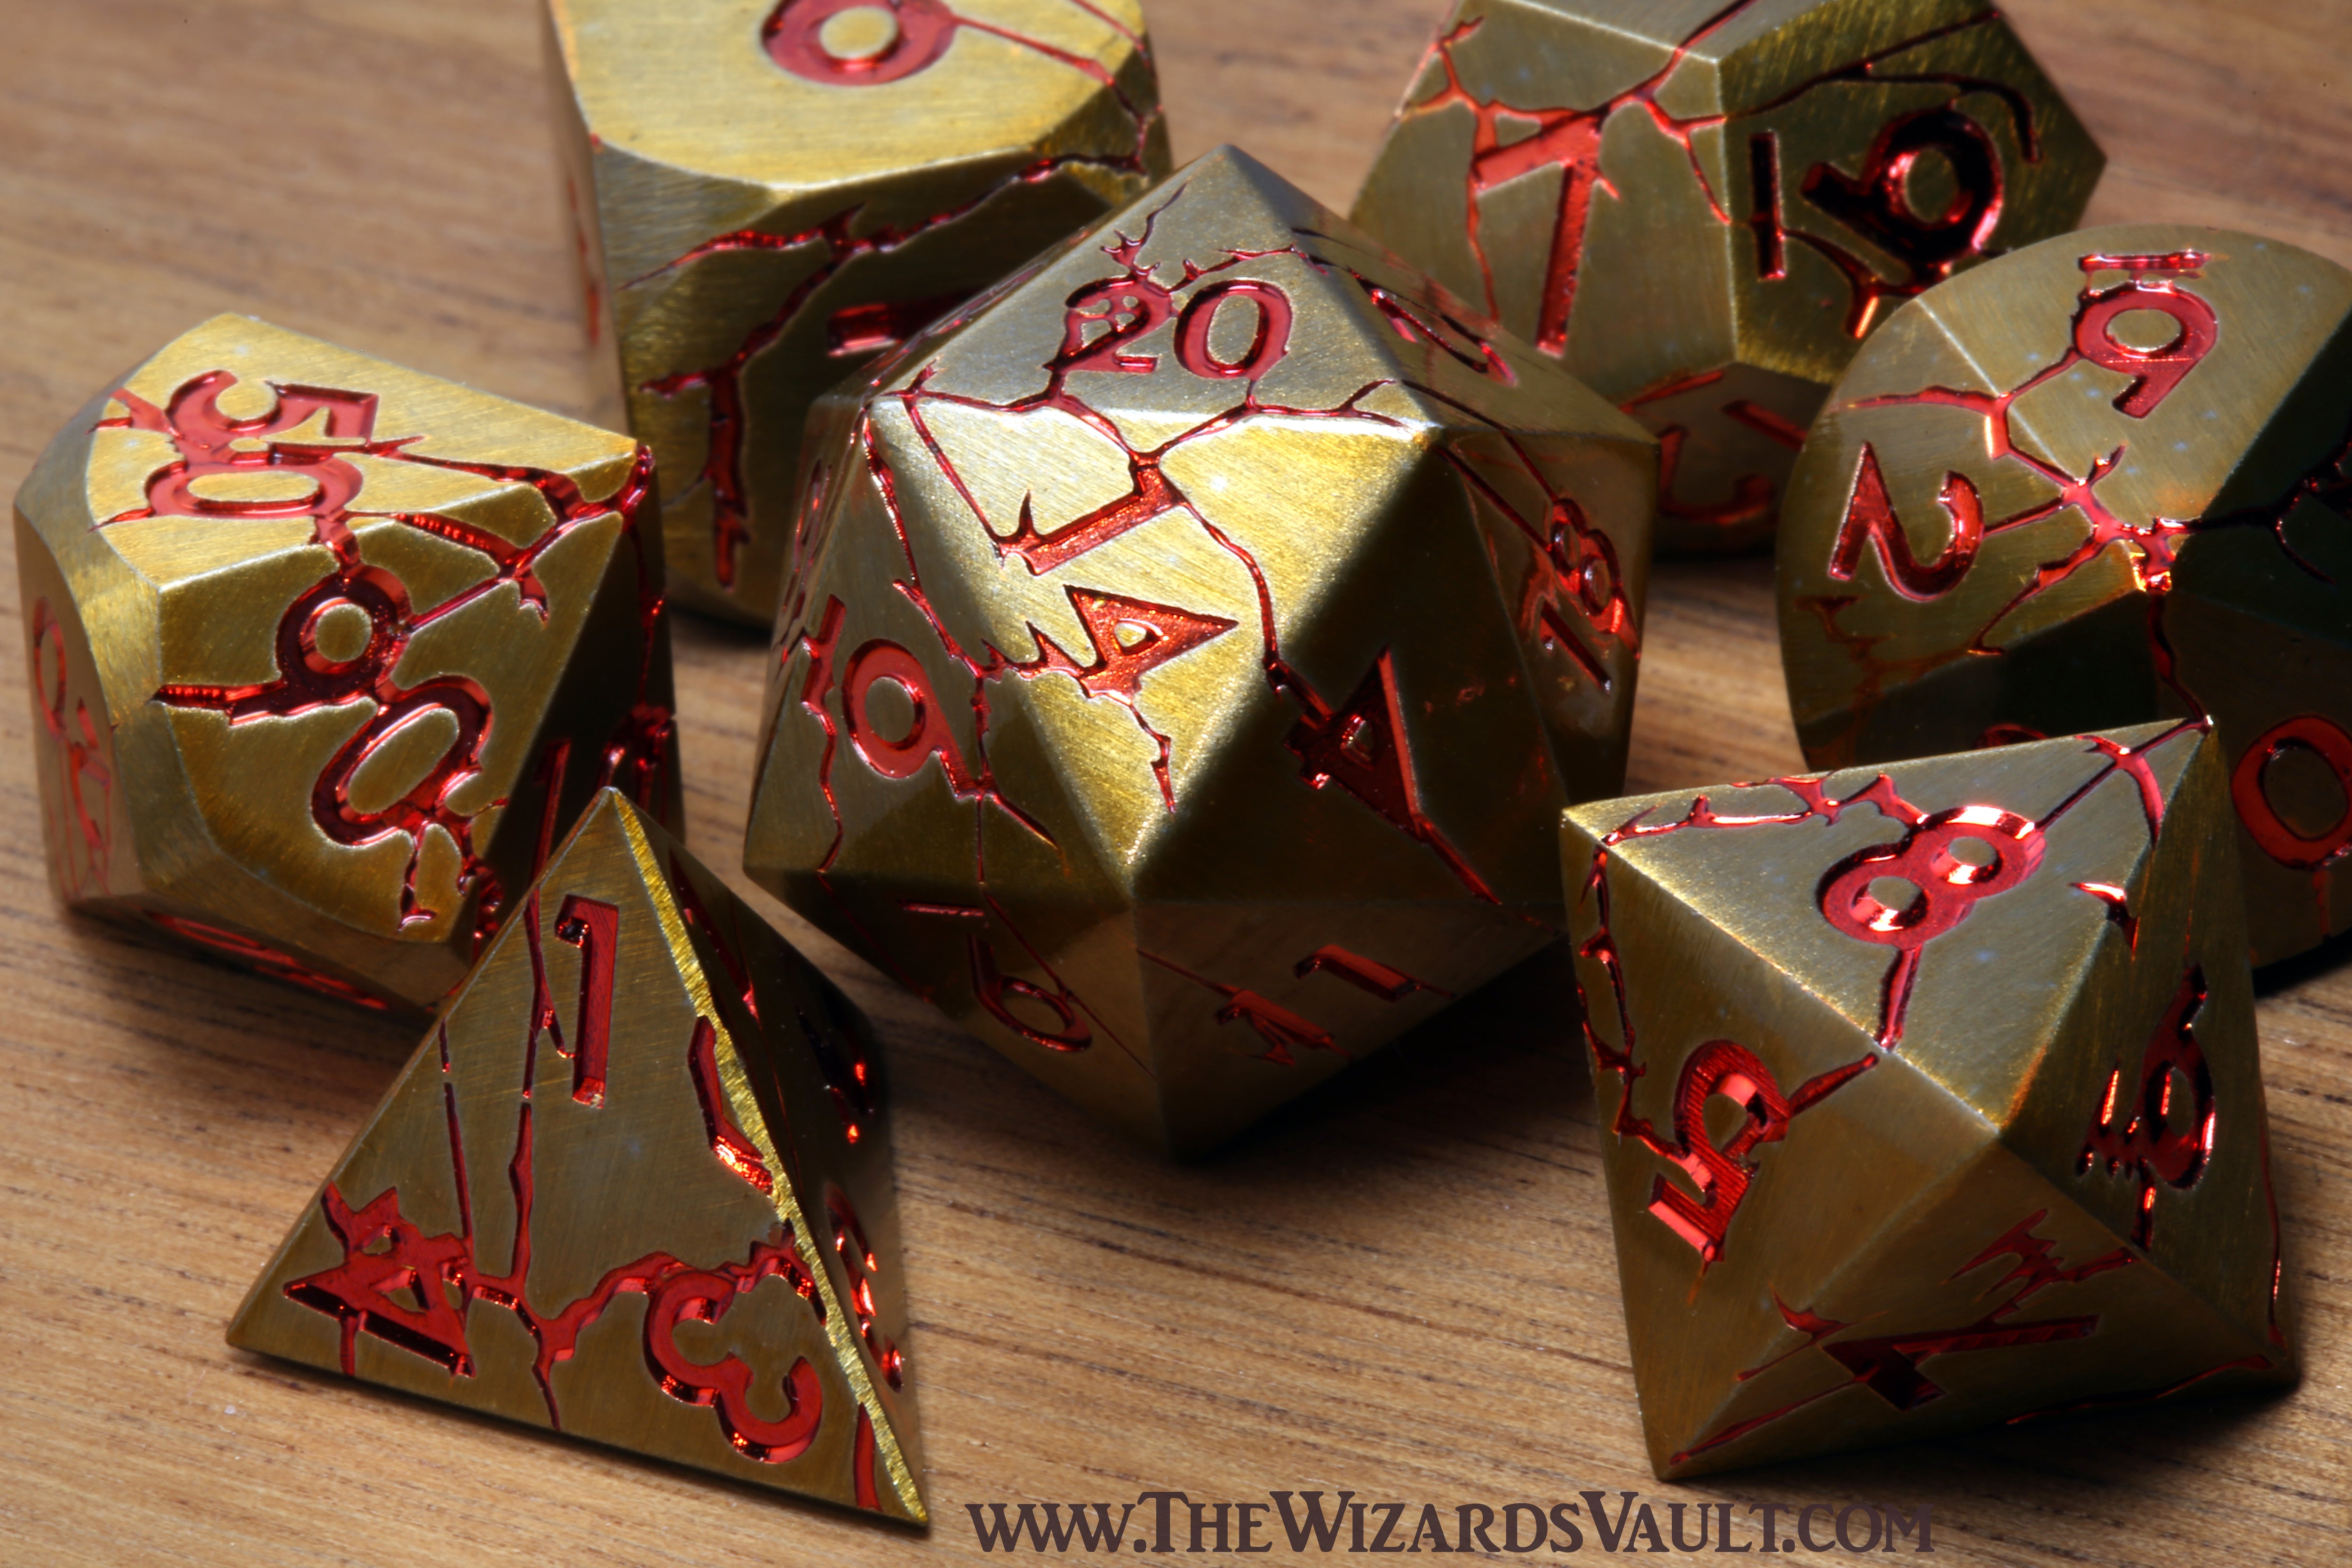 Volcanic Lair - Antique gold with craked stone effect and red font - The Wizard's Vault